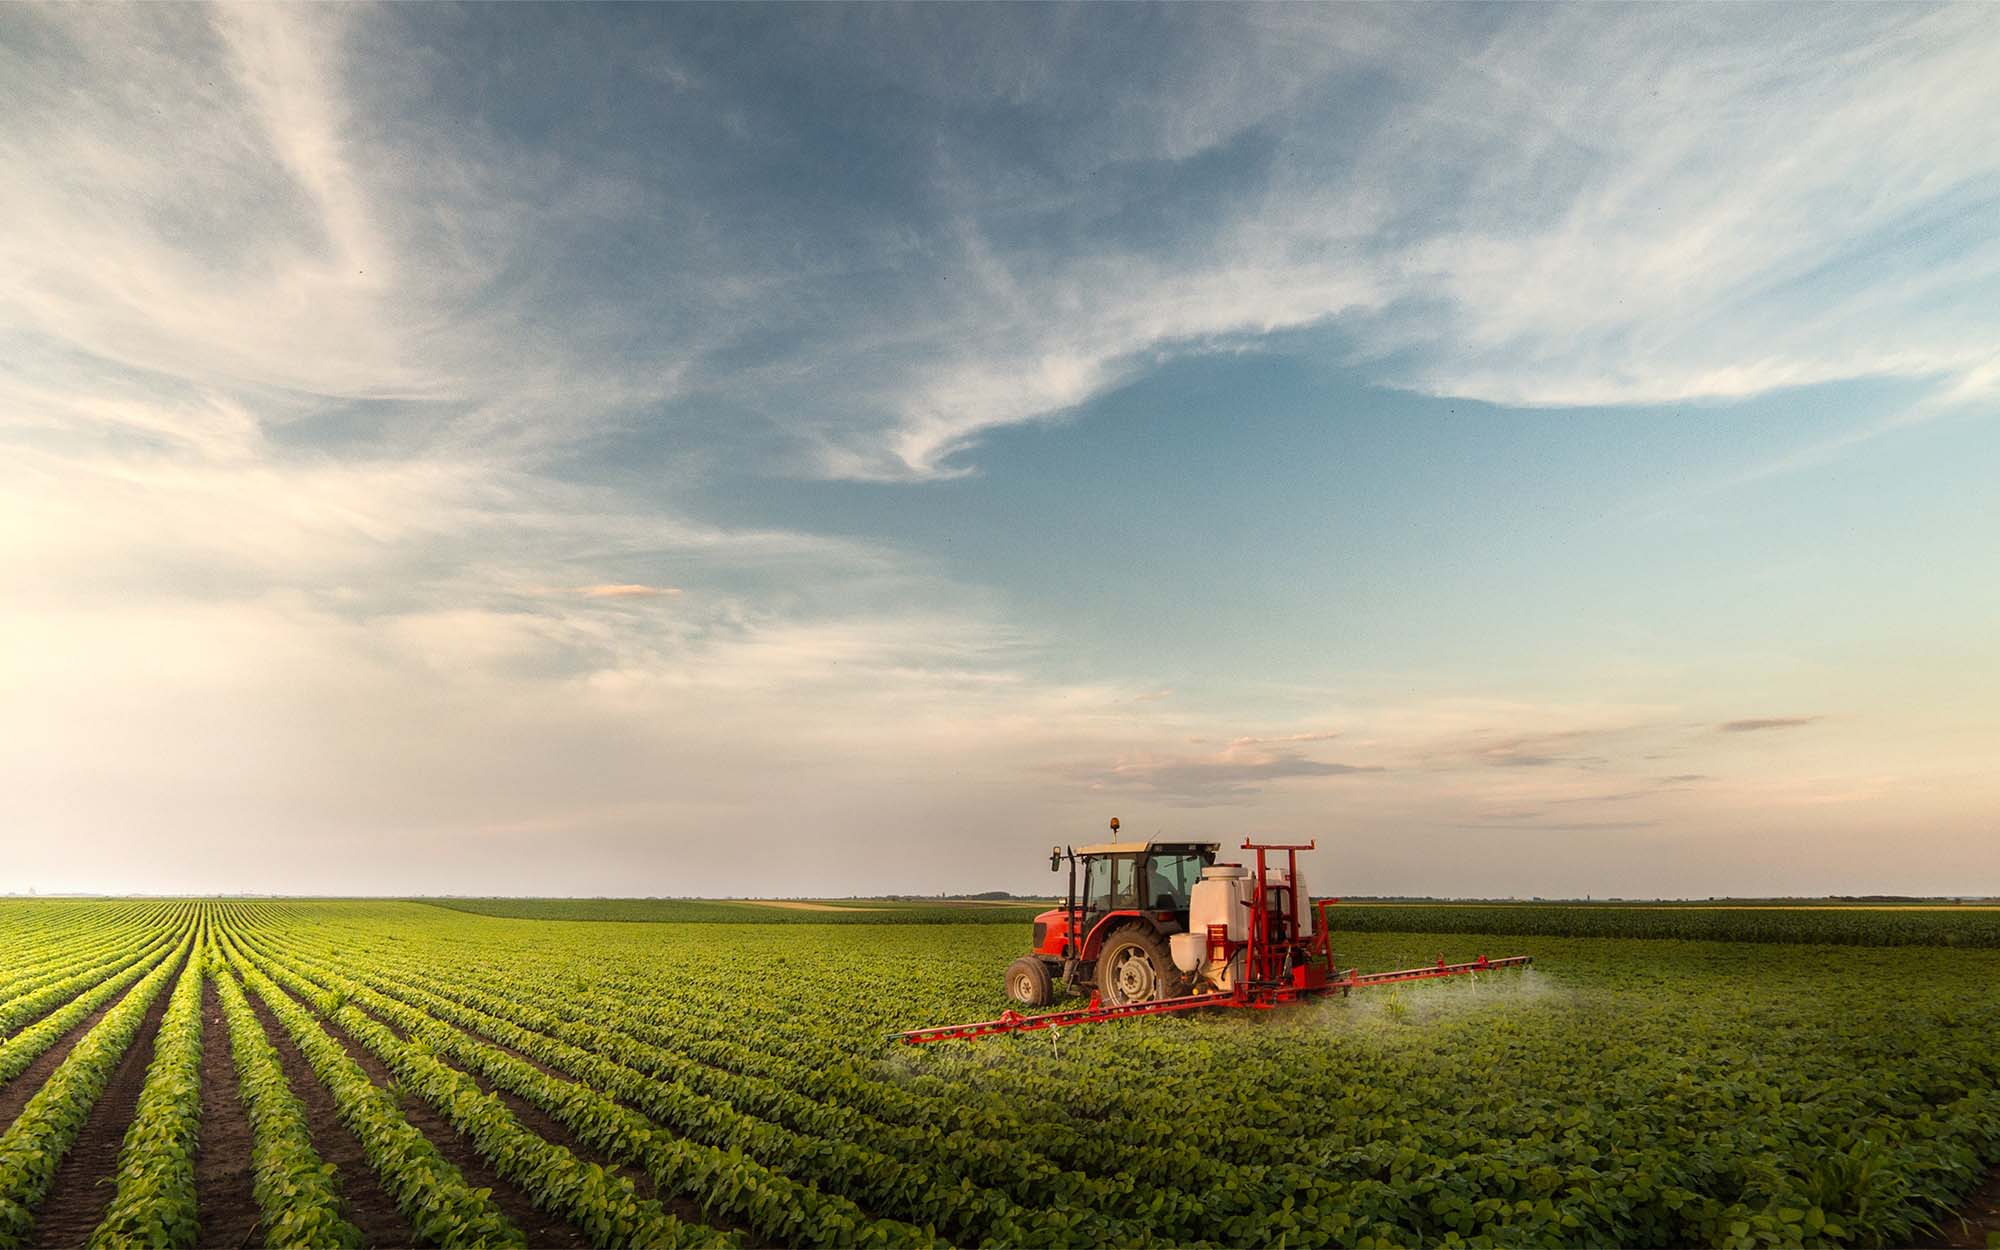 Tractor spraying pesticides at soy bean field